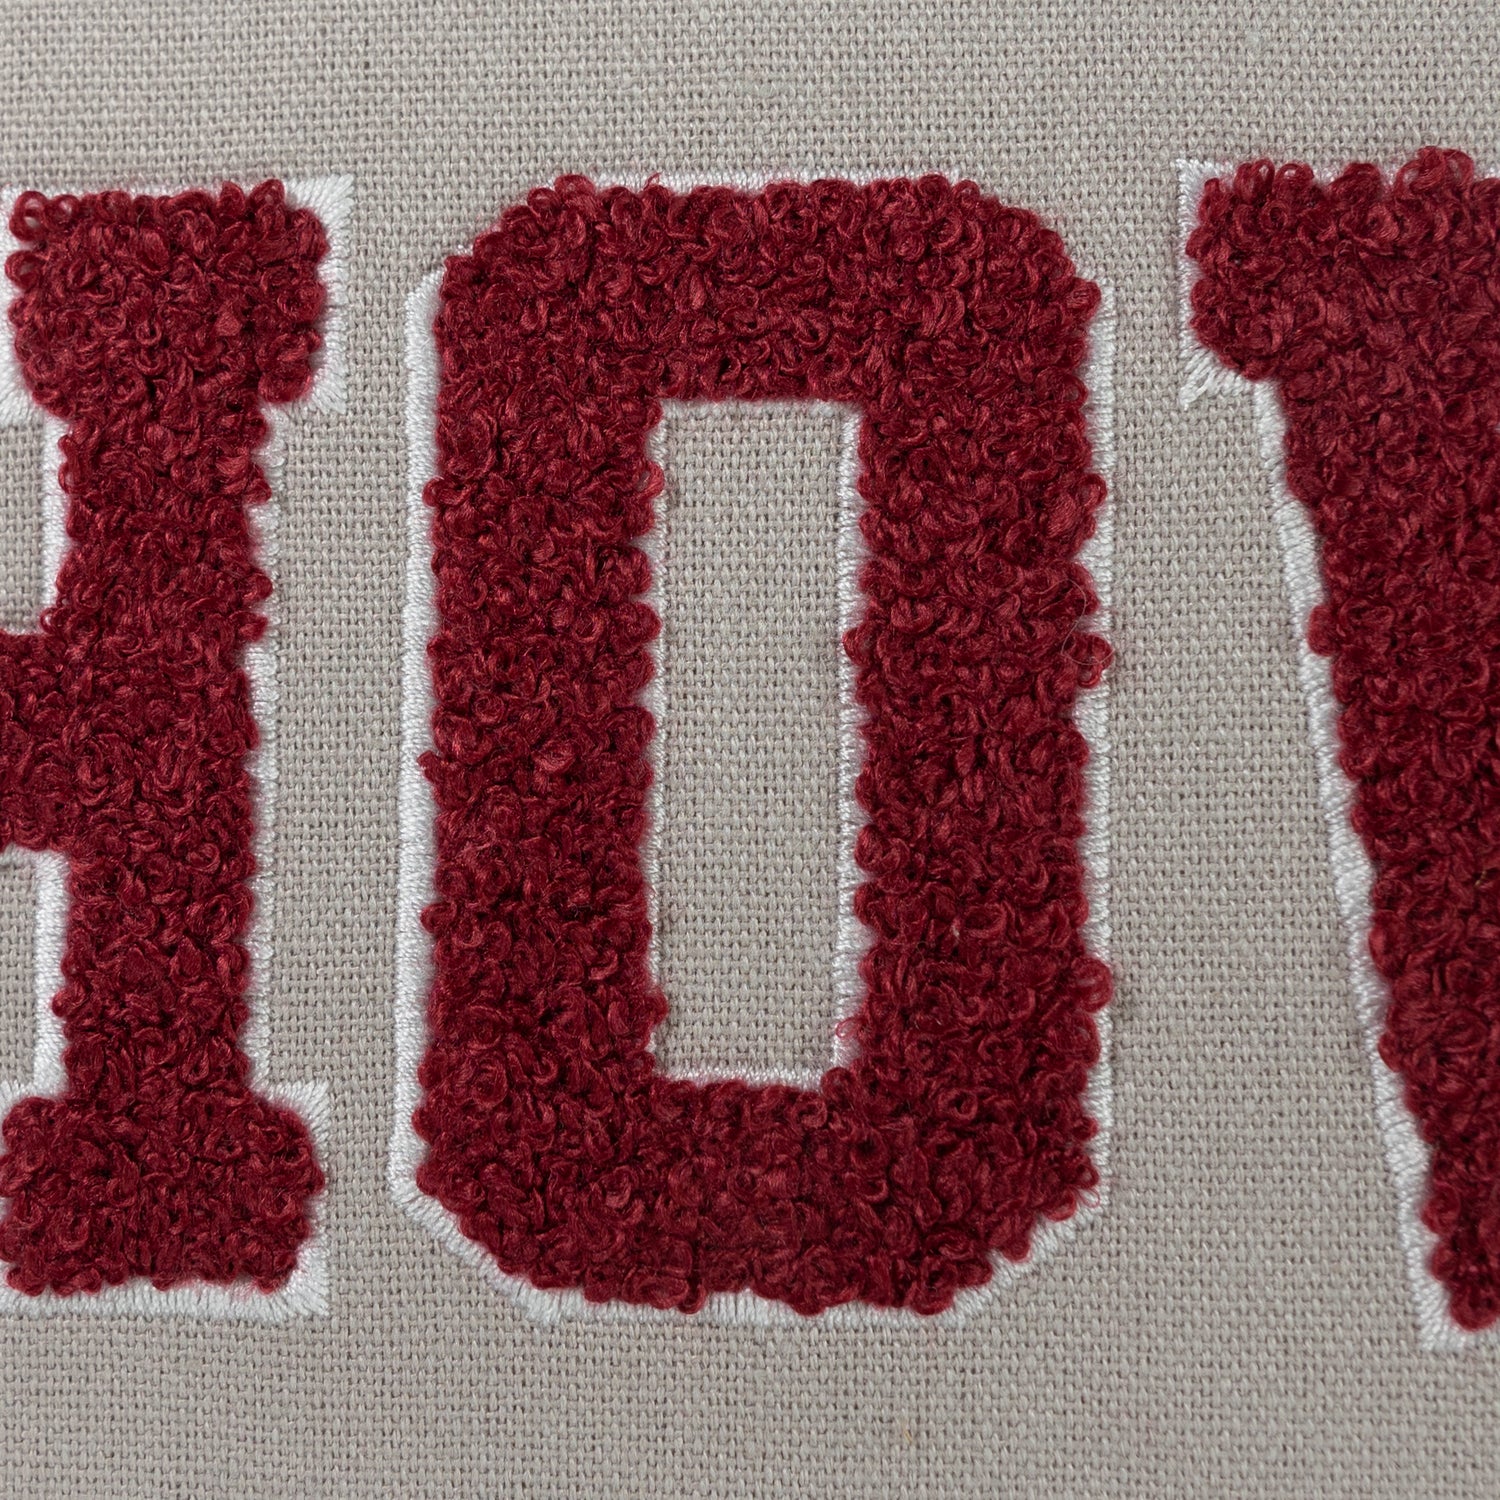 Howdy Maroon Embroidered Grey Pillow